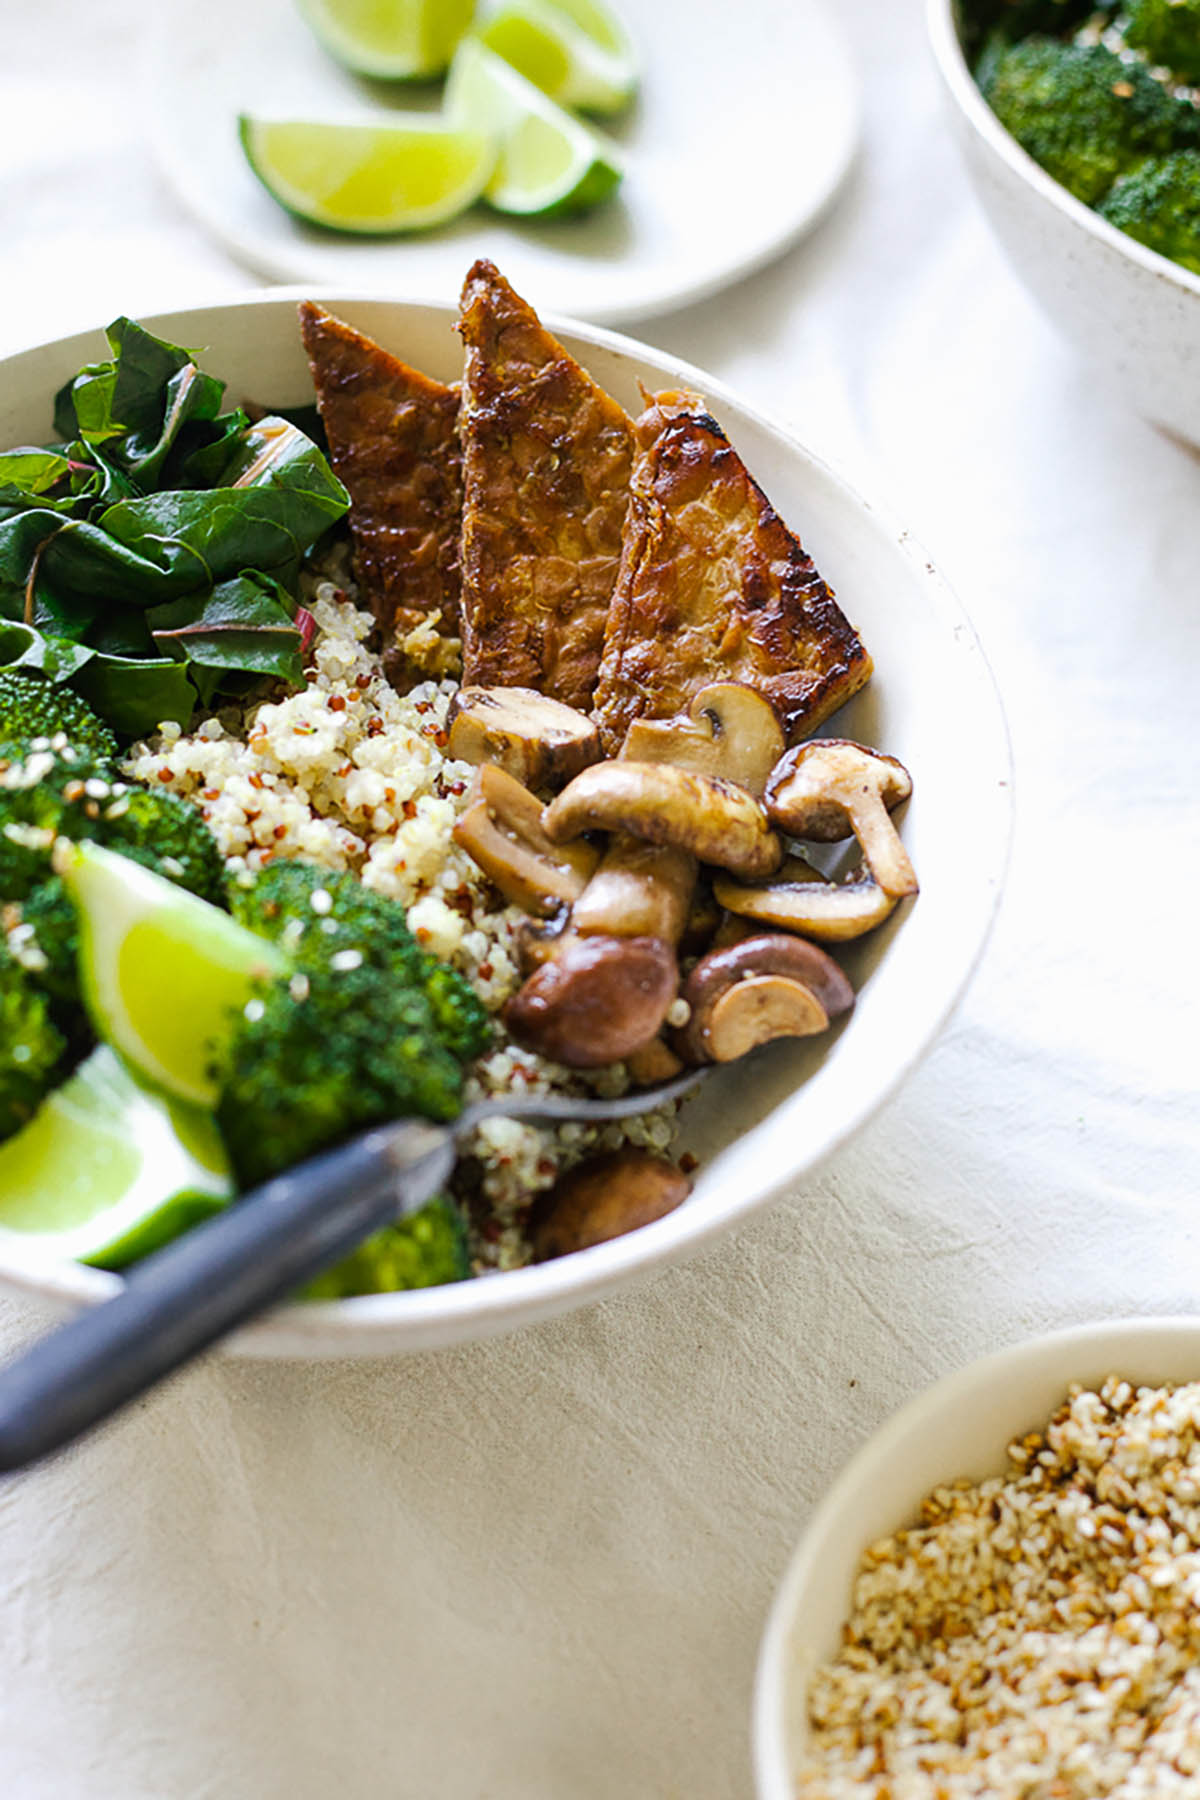 Quinoa bowl with tempeh and steamed vegetables.